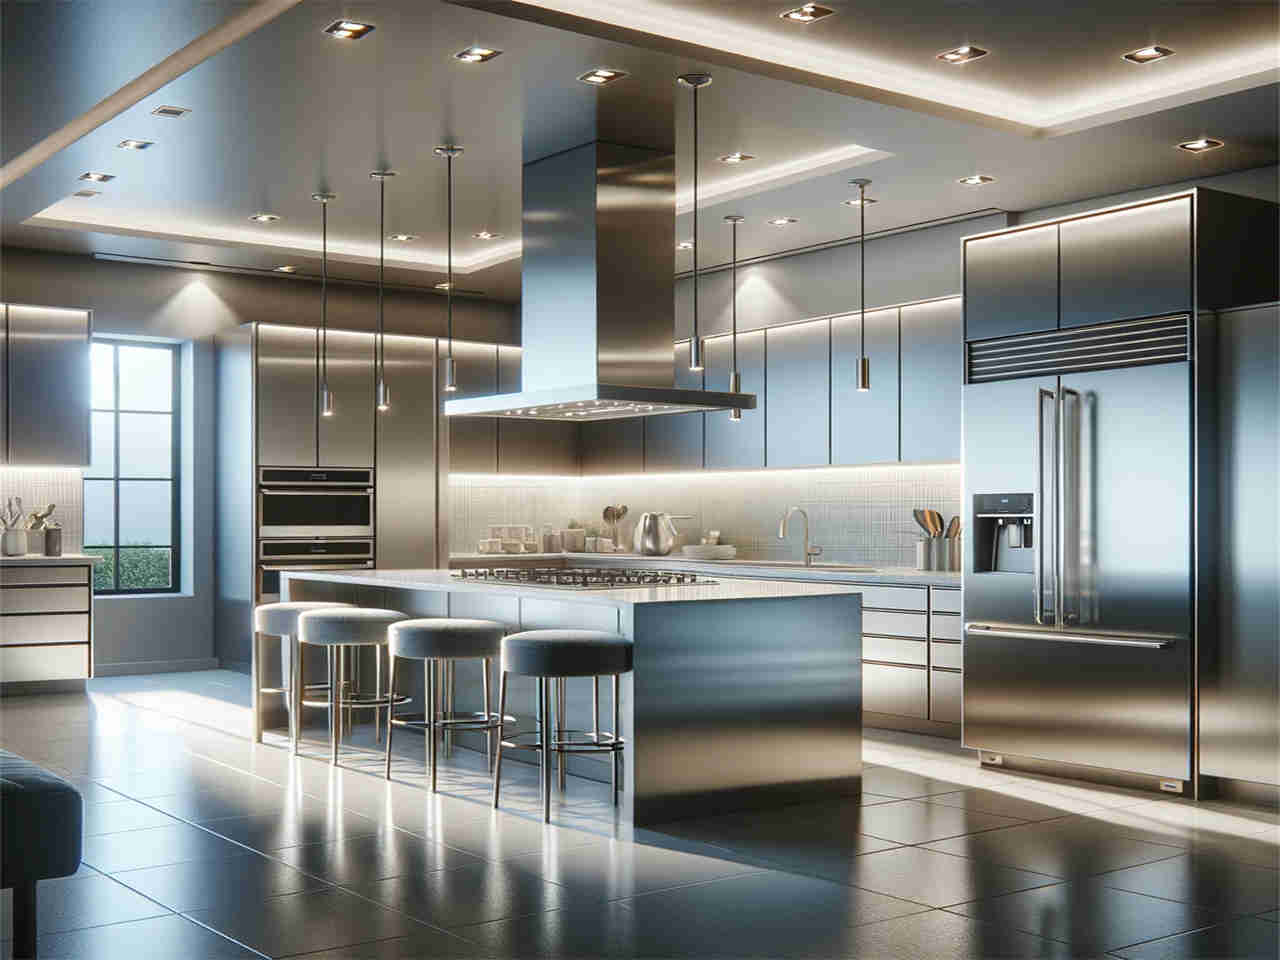 kitchen recessed lighting ideas -About lighting--DALL·E 2024 01 09 16.02.40 A modern kitchen with recessed lighting. The kitchen is spacious with sleek, contemporary design elements. Stainless steel appliances, including a ref